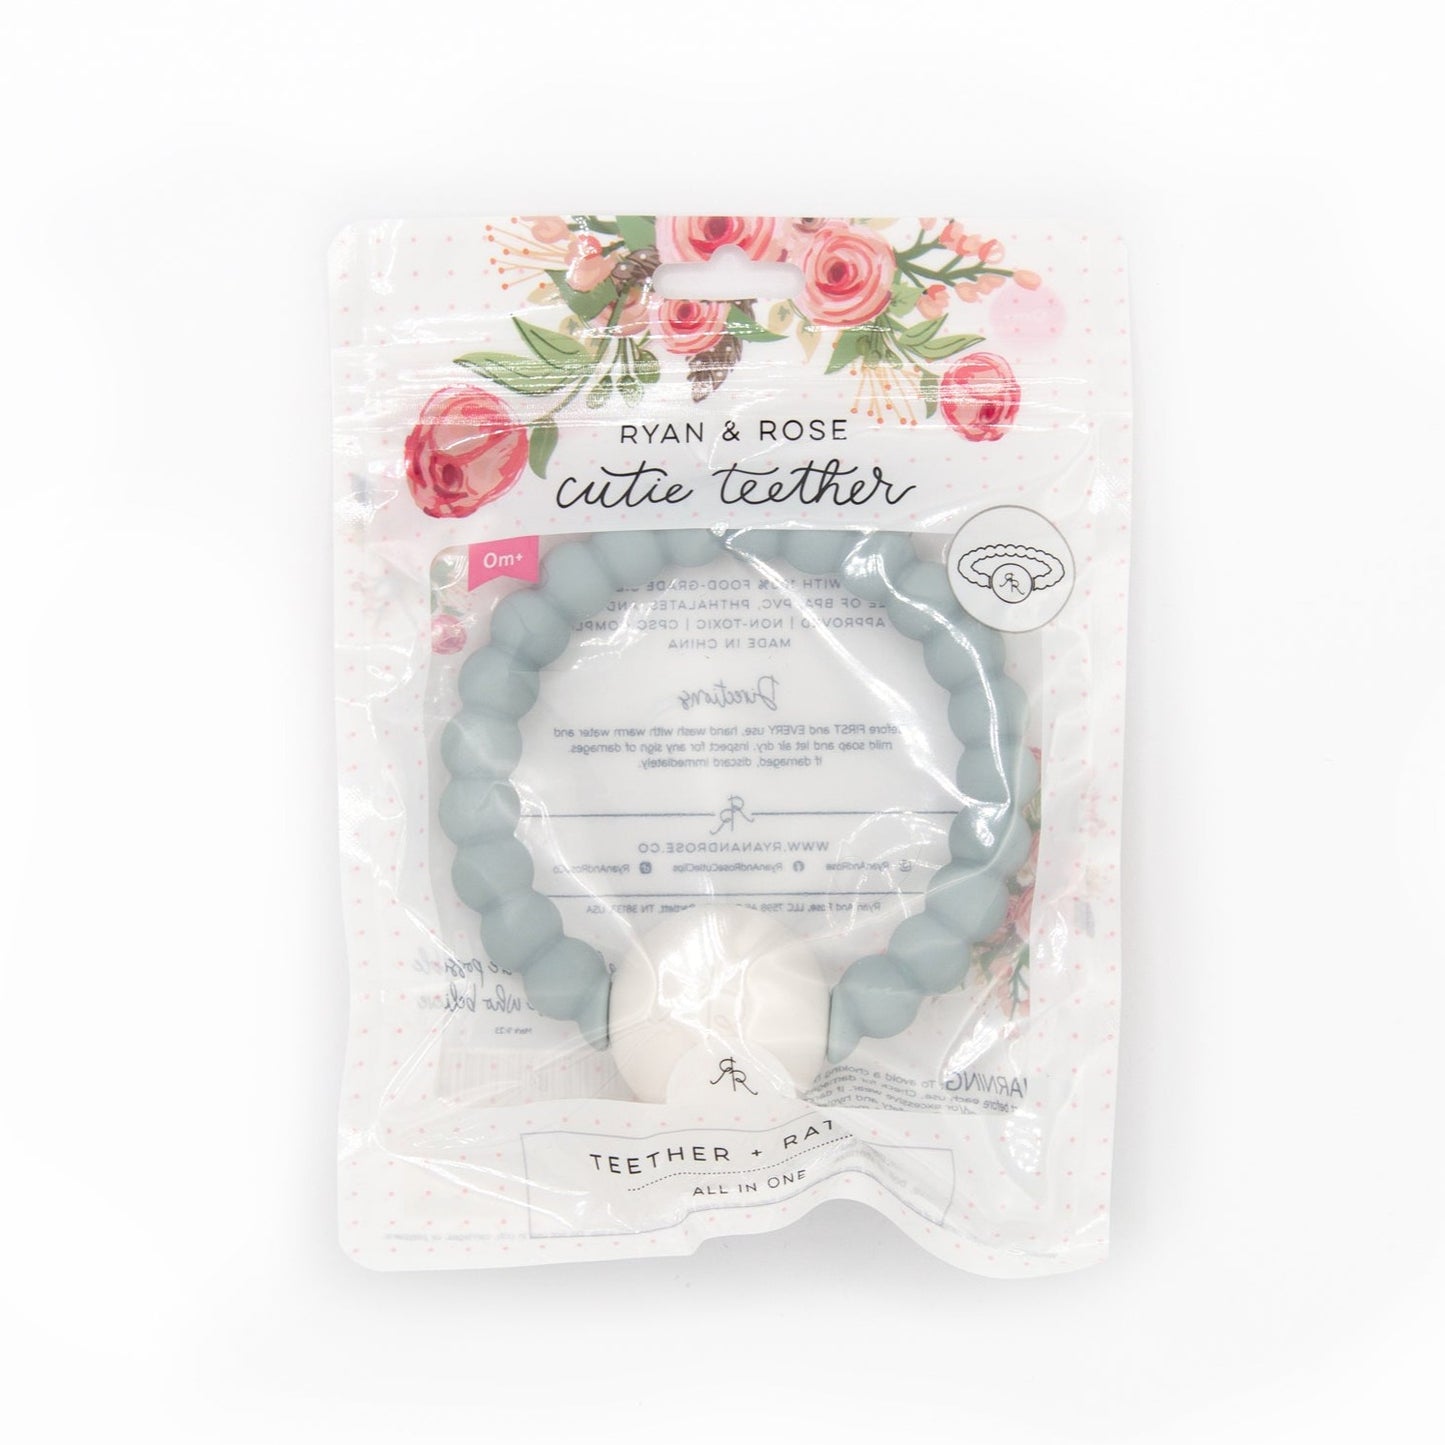 Ryan and Rose Cutie Teether Rattle - Blue in packaging